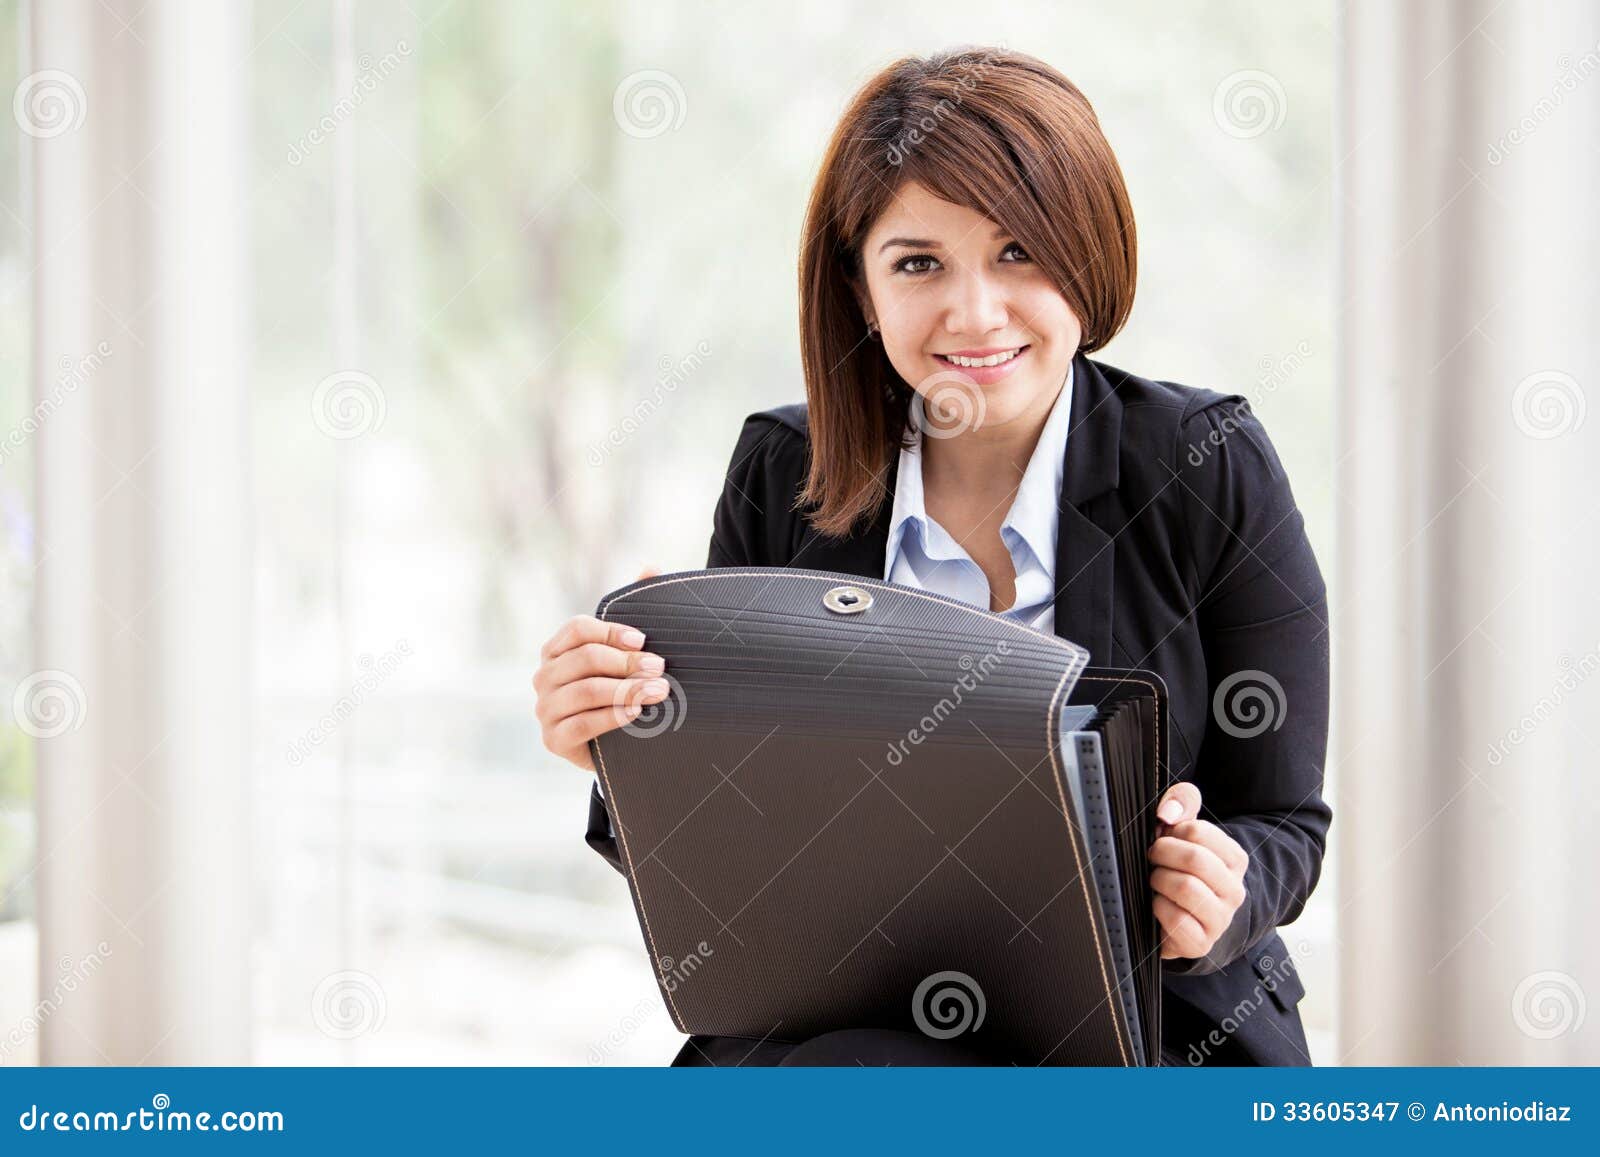 Cute female architect at work. Happy young female architect on a suit opening a briefcase and smiling